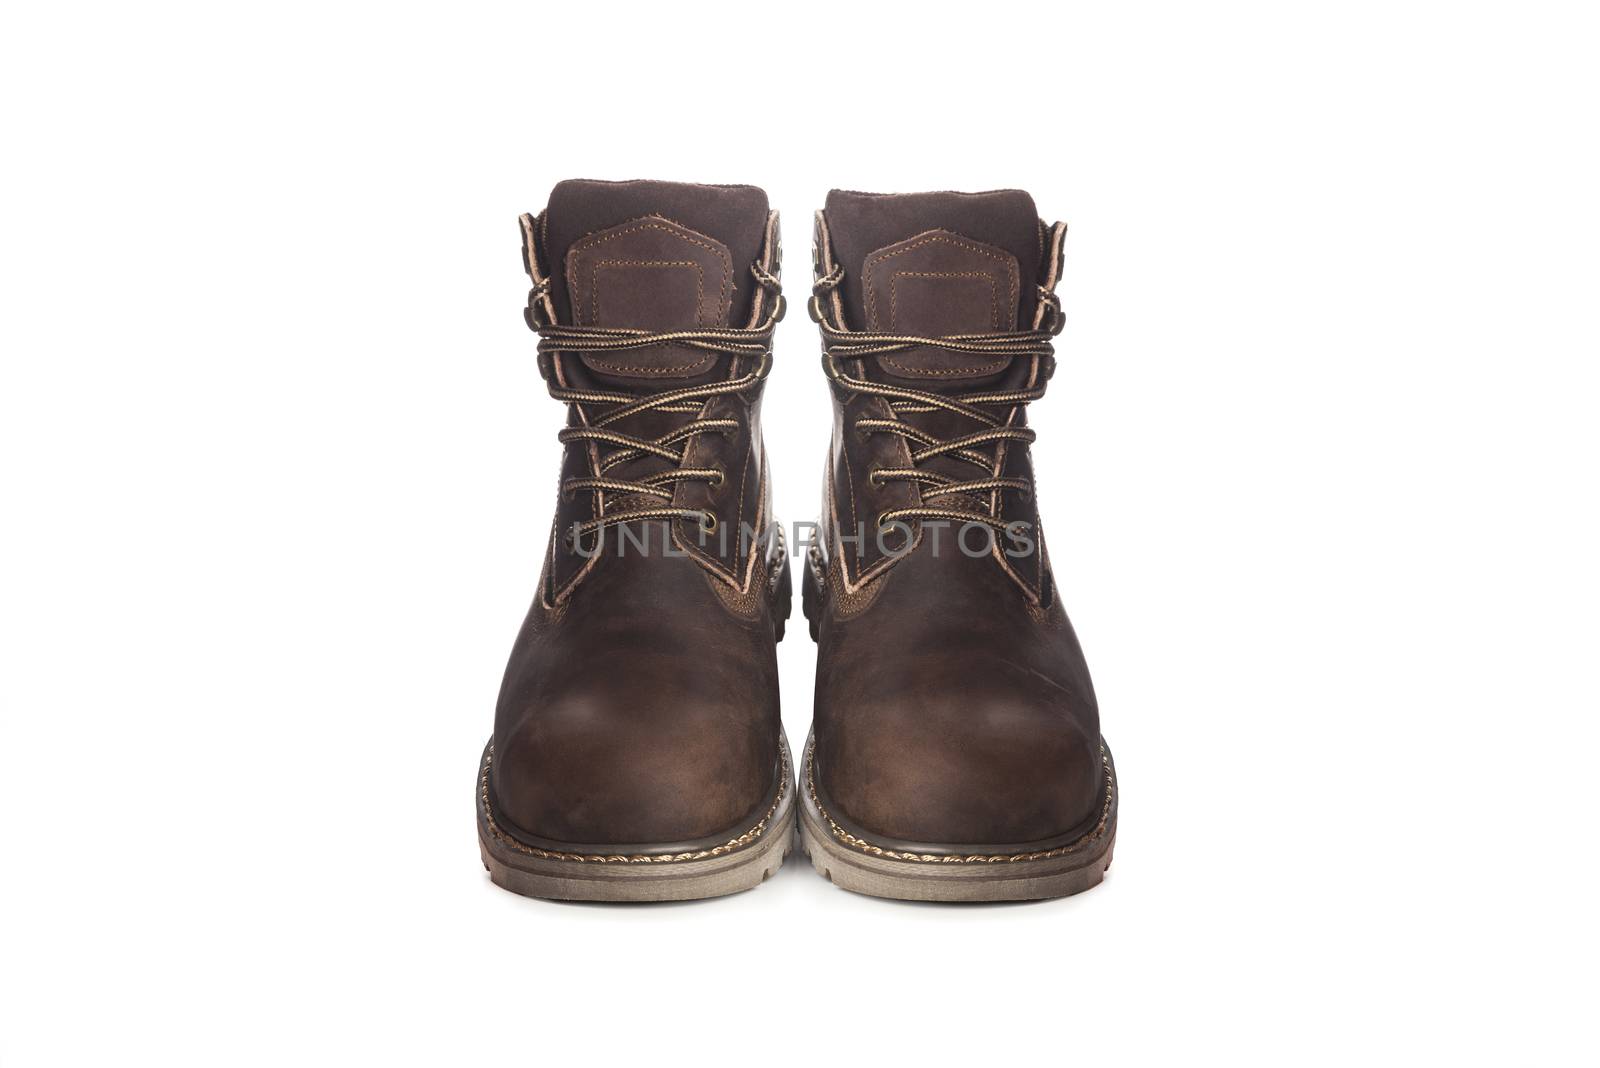 Man ankle boots, brown color, with nubuck leather by SlayCer